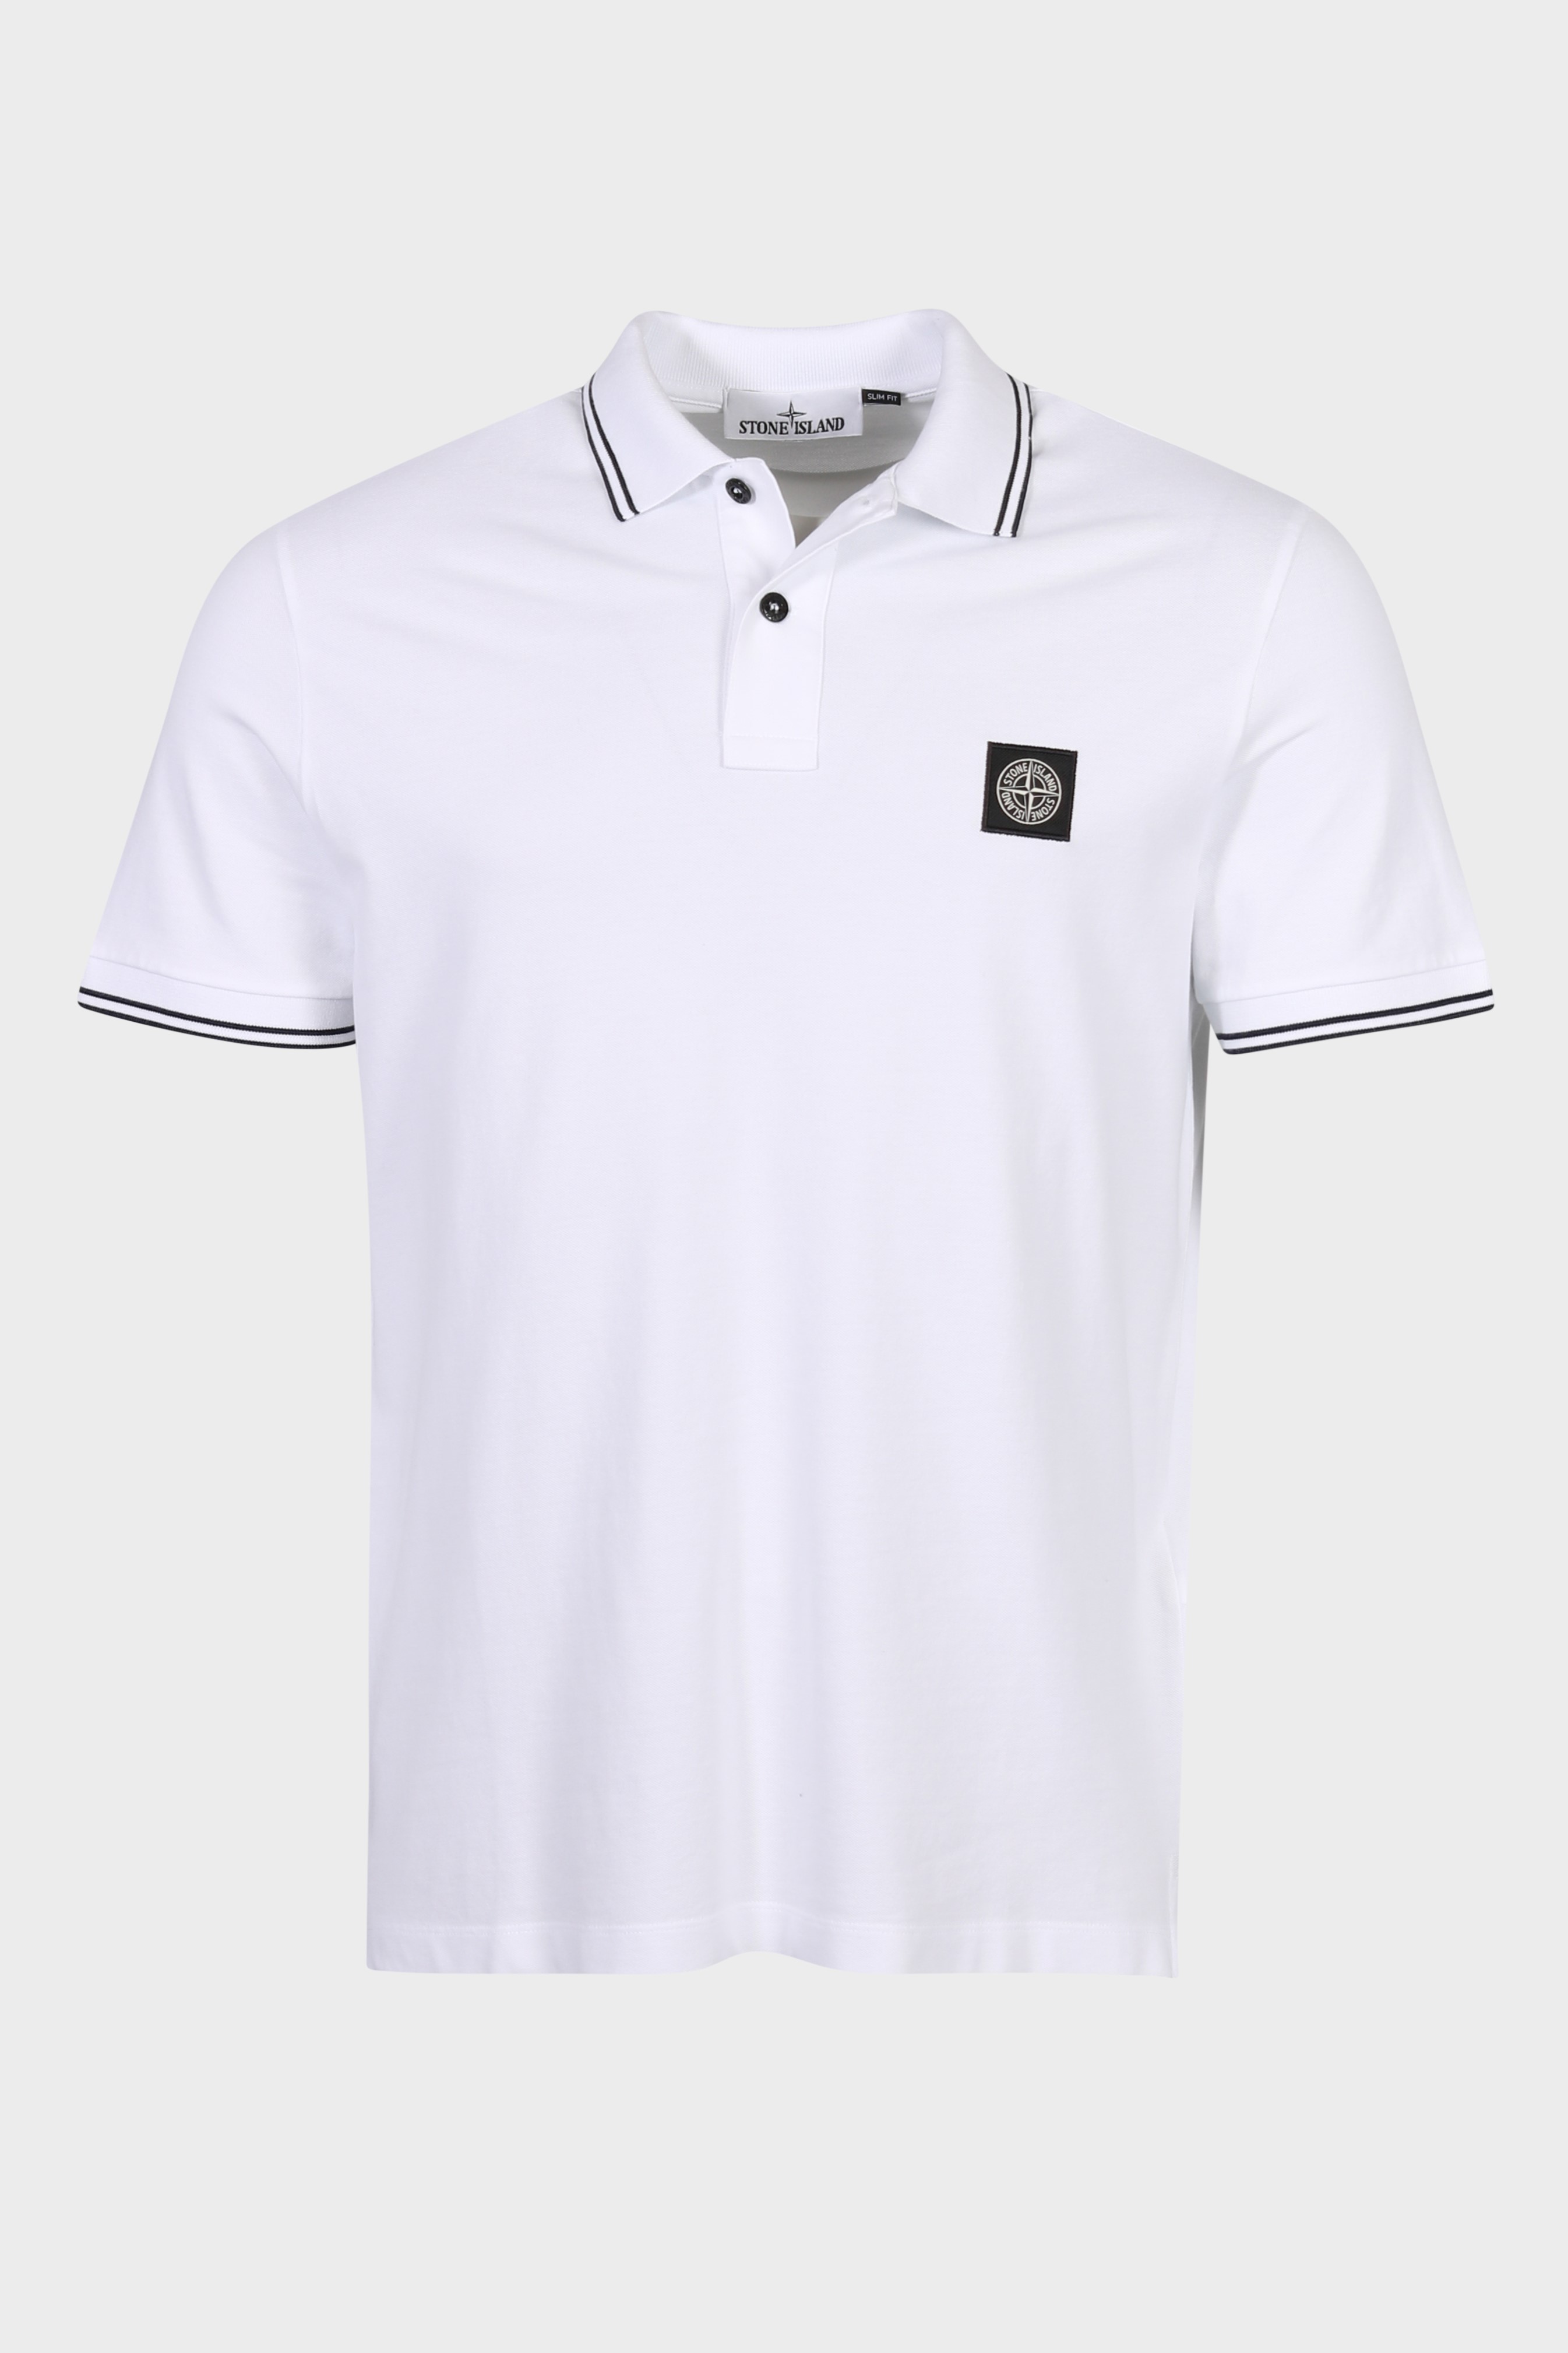 STONE ISLAND Slim Fit Polo Shirt in White M